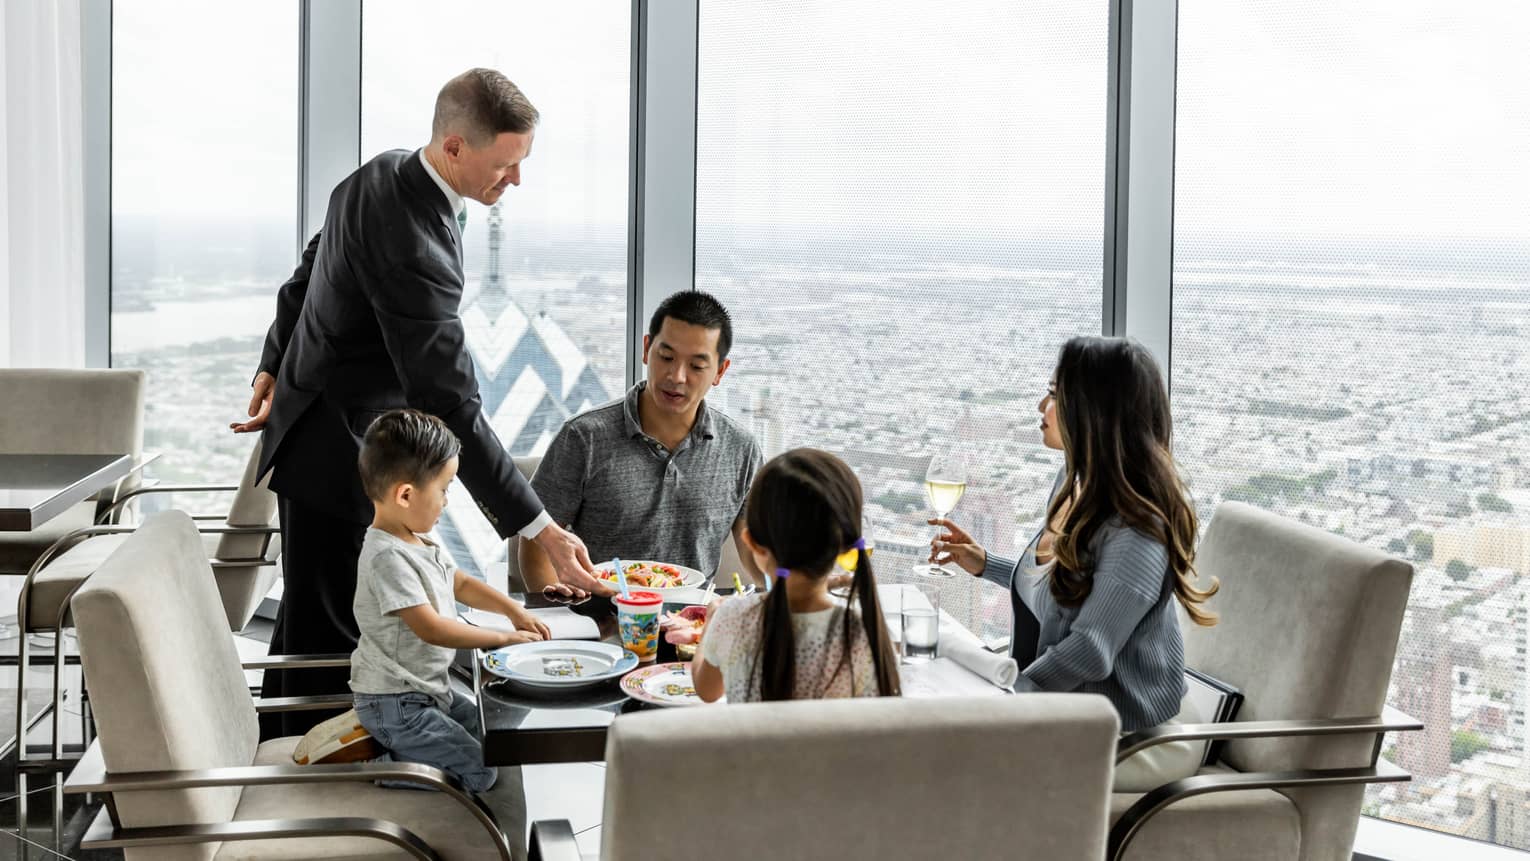 A staff member in a suit placing food on a table for a family of four including a mother, father, daughter, and son; there are large windows looking at a city below around them.